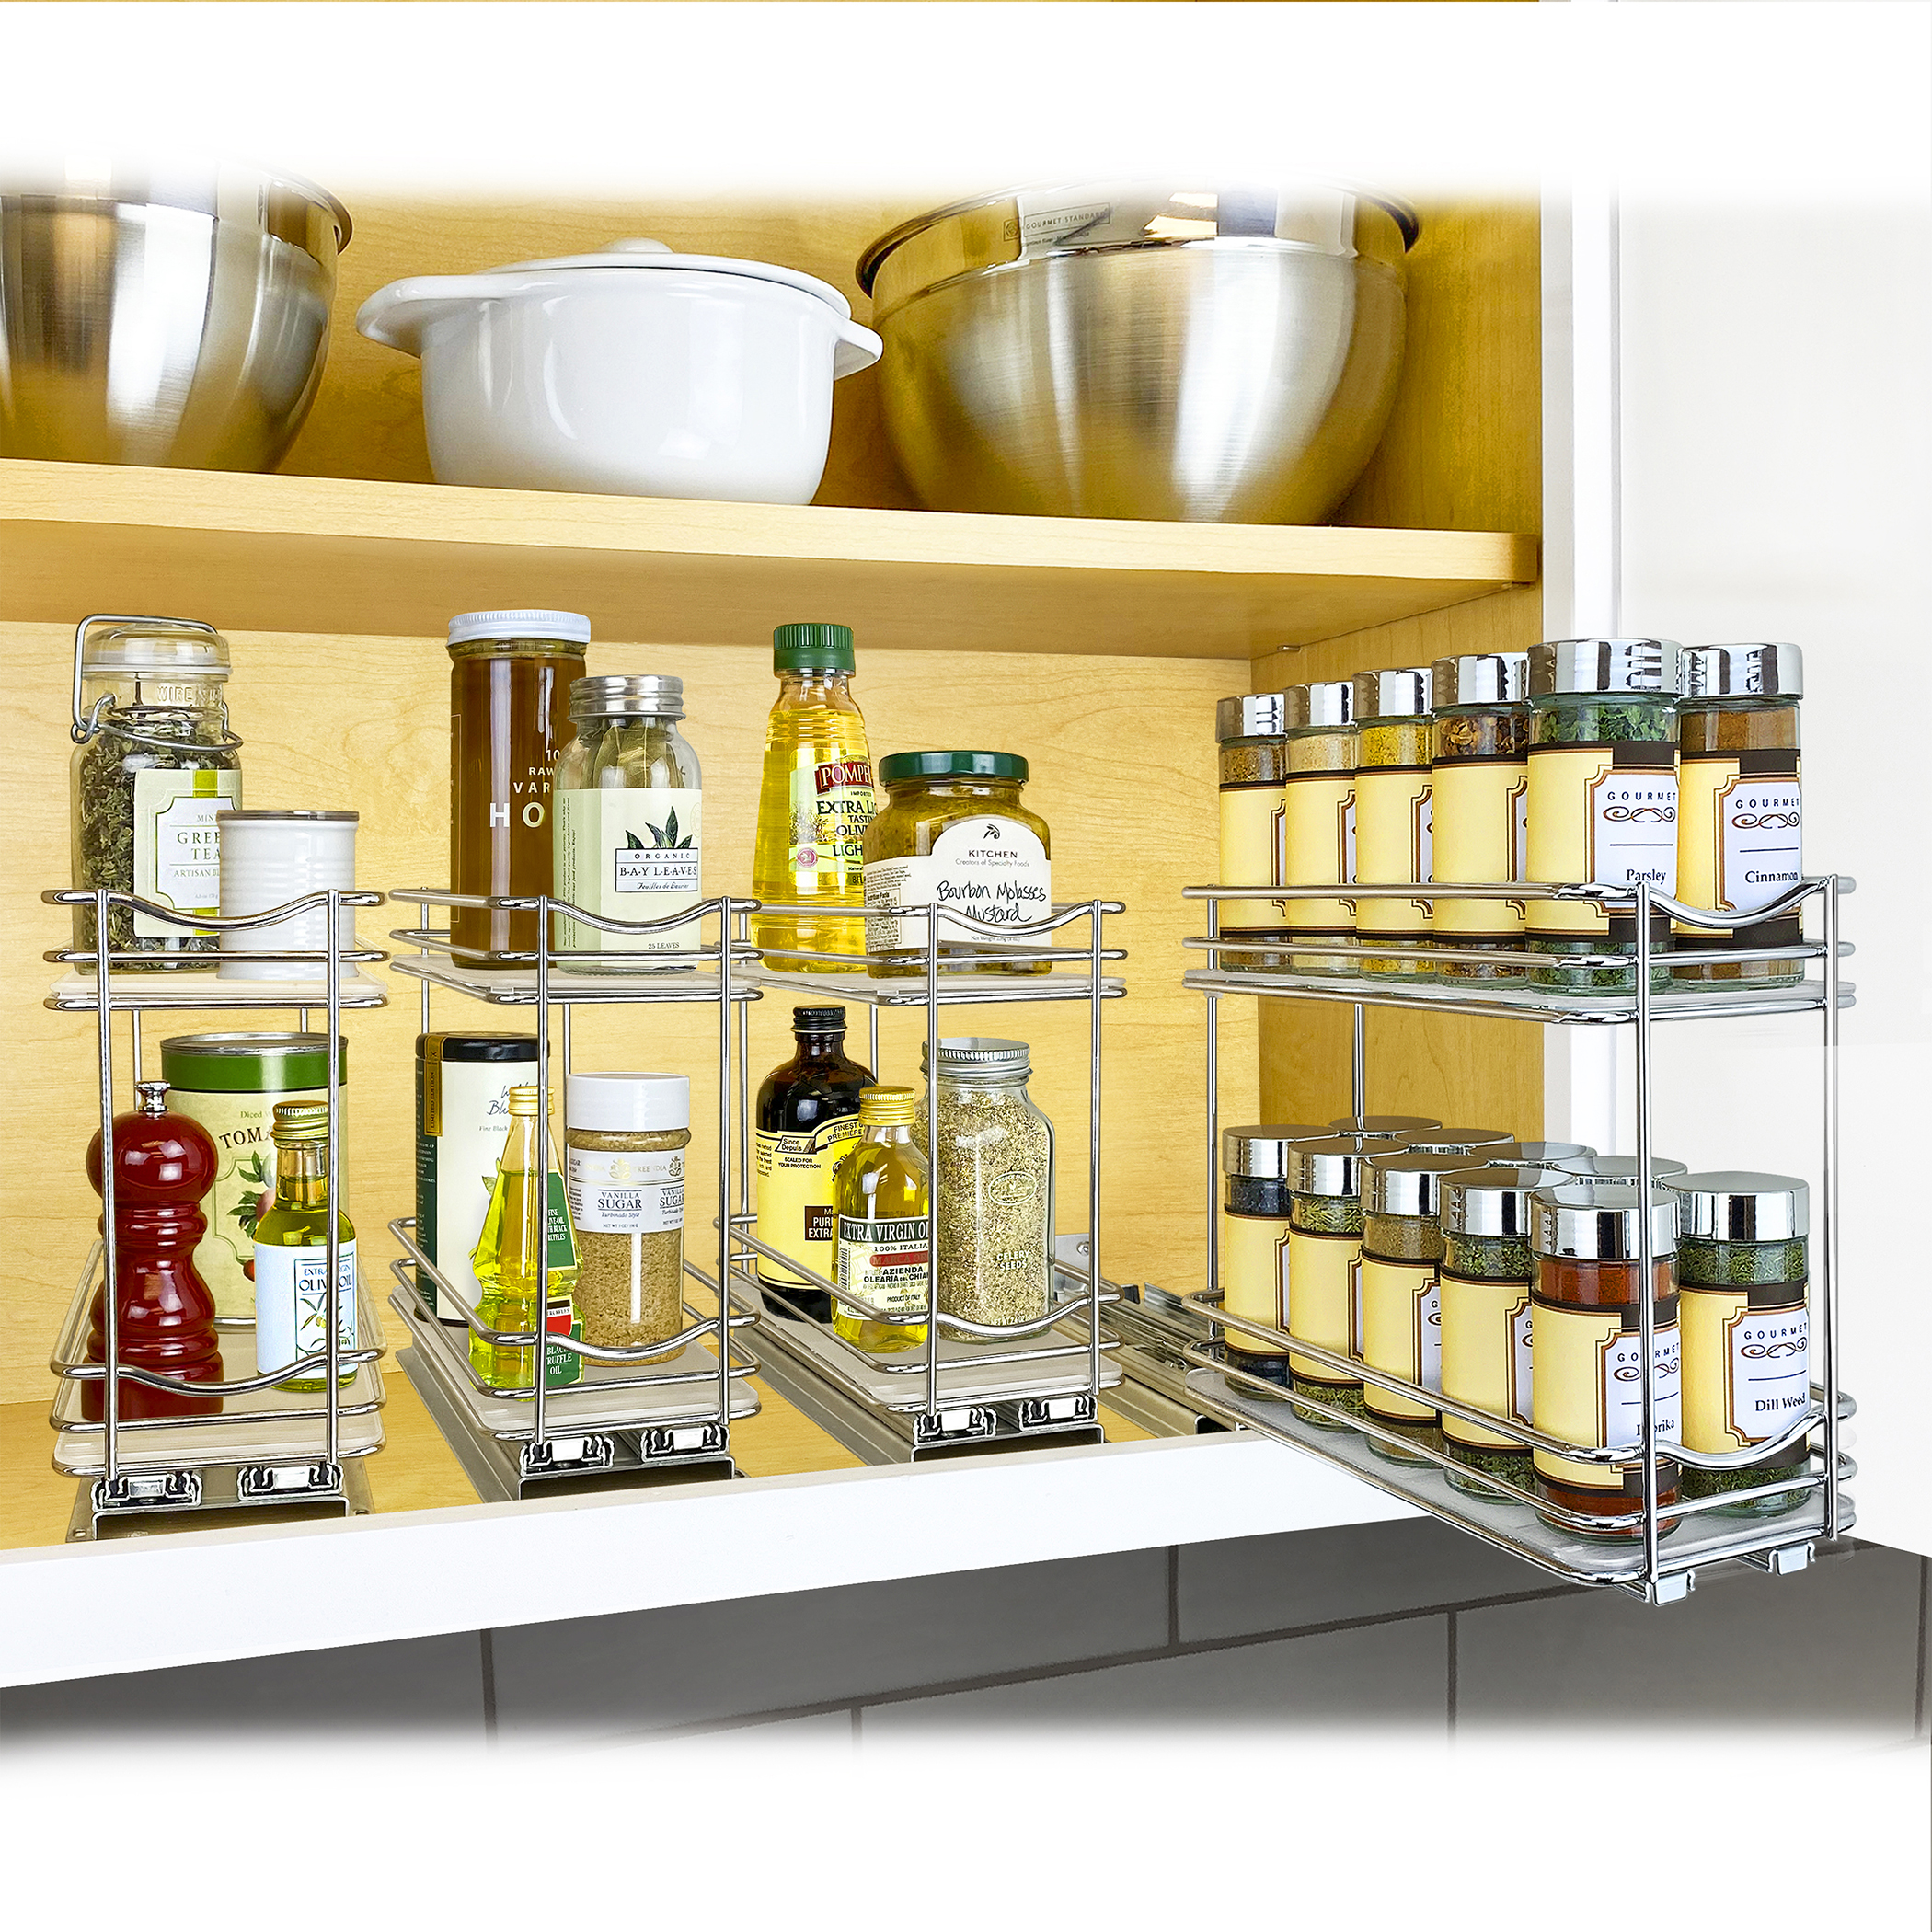 Spice Organizer Two Tier, Lynk Professional Slide Out Spice Rack Upper Cabinet Organizer